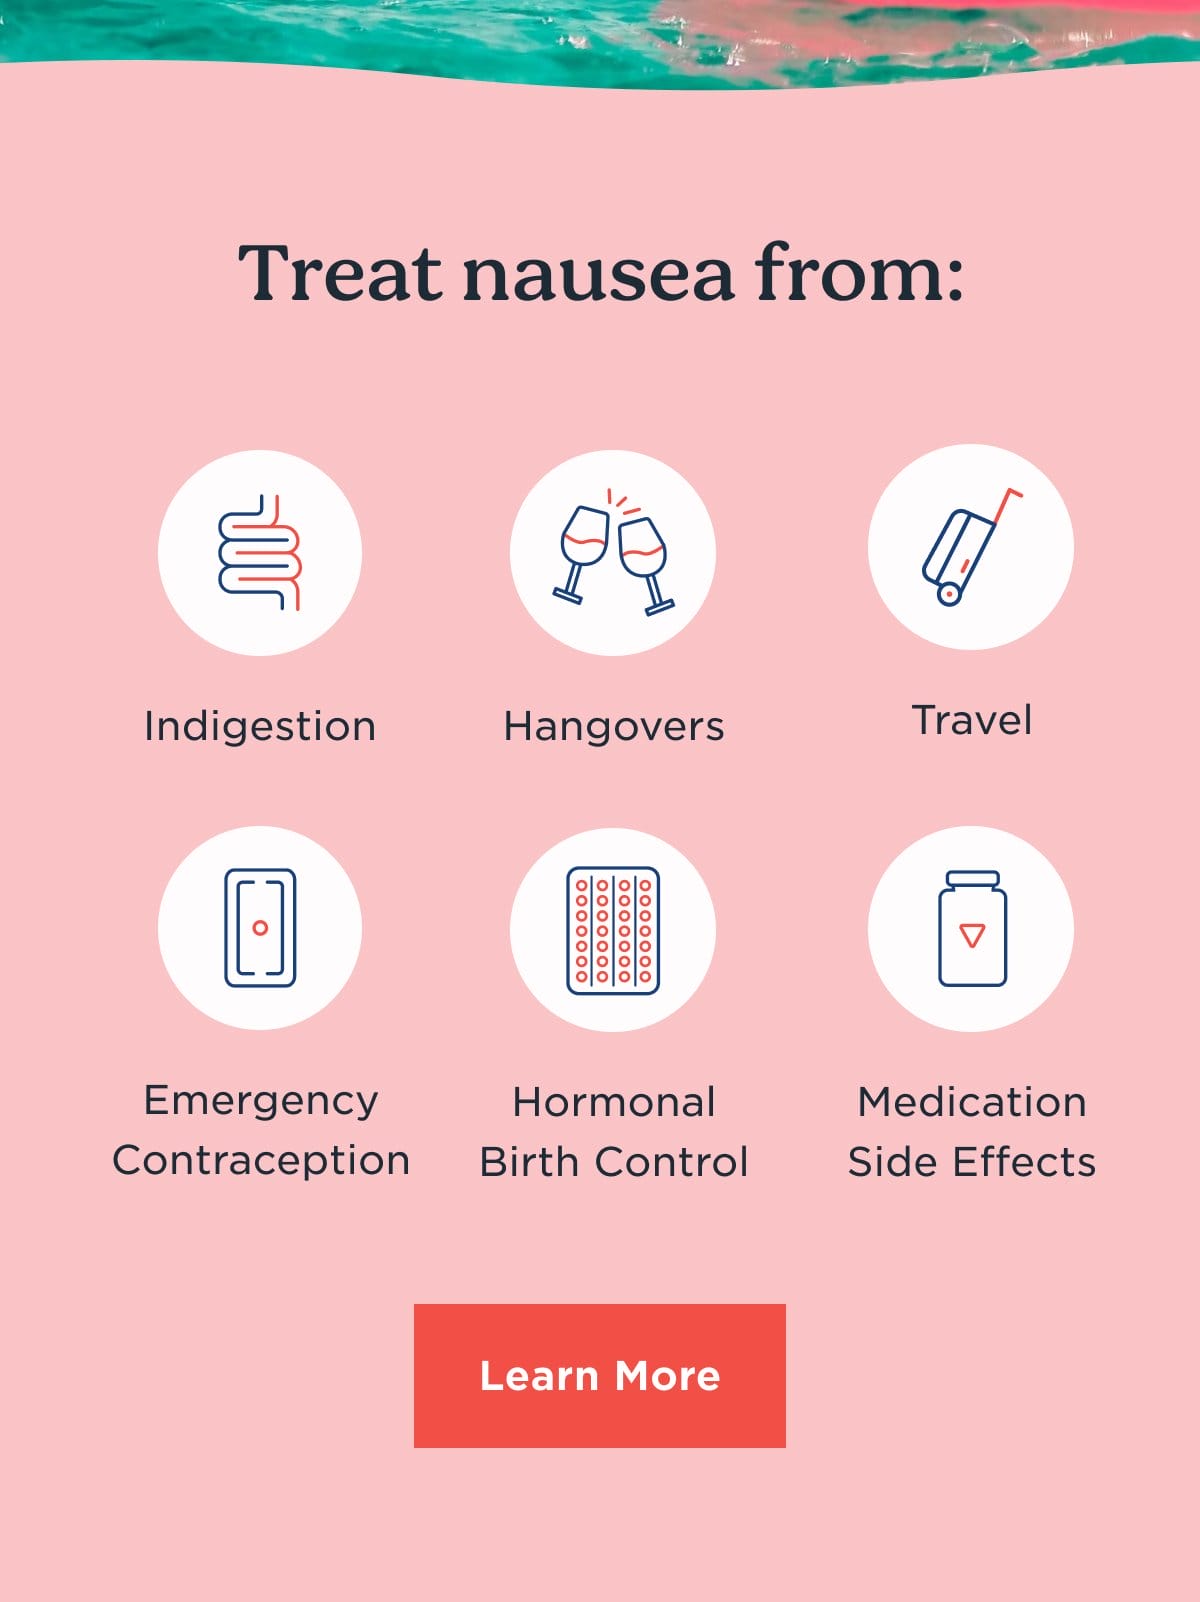 Treat nausea from | Learn More